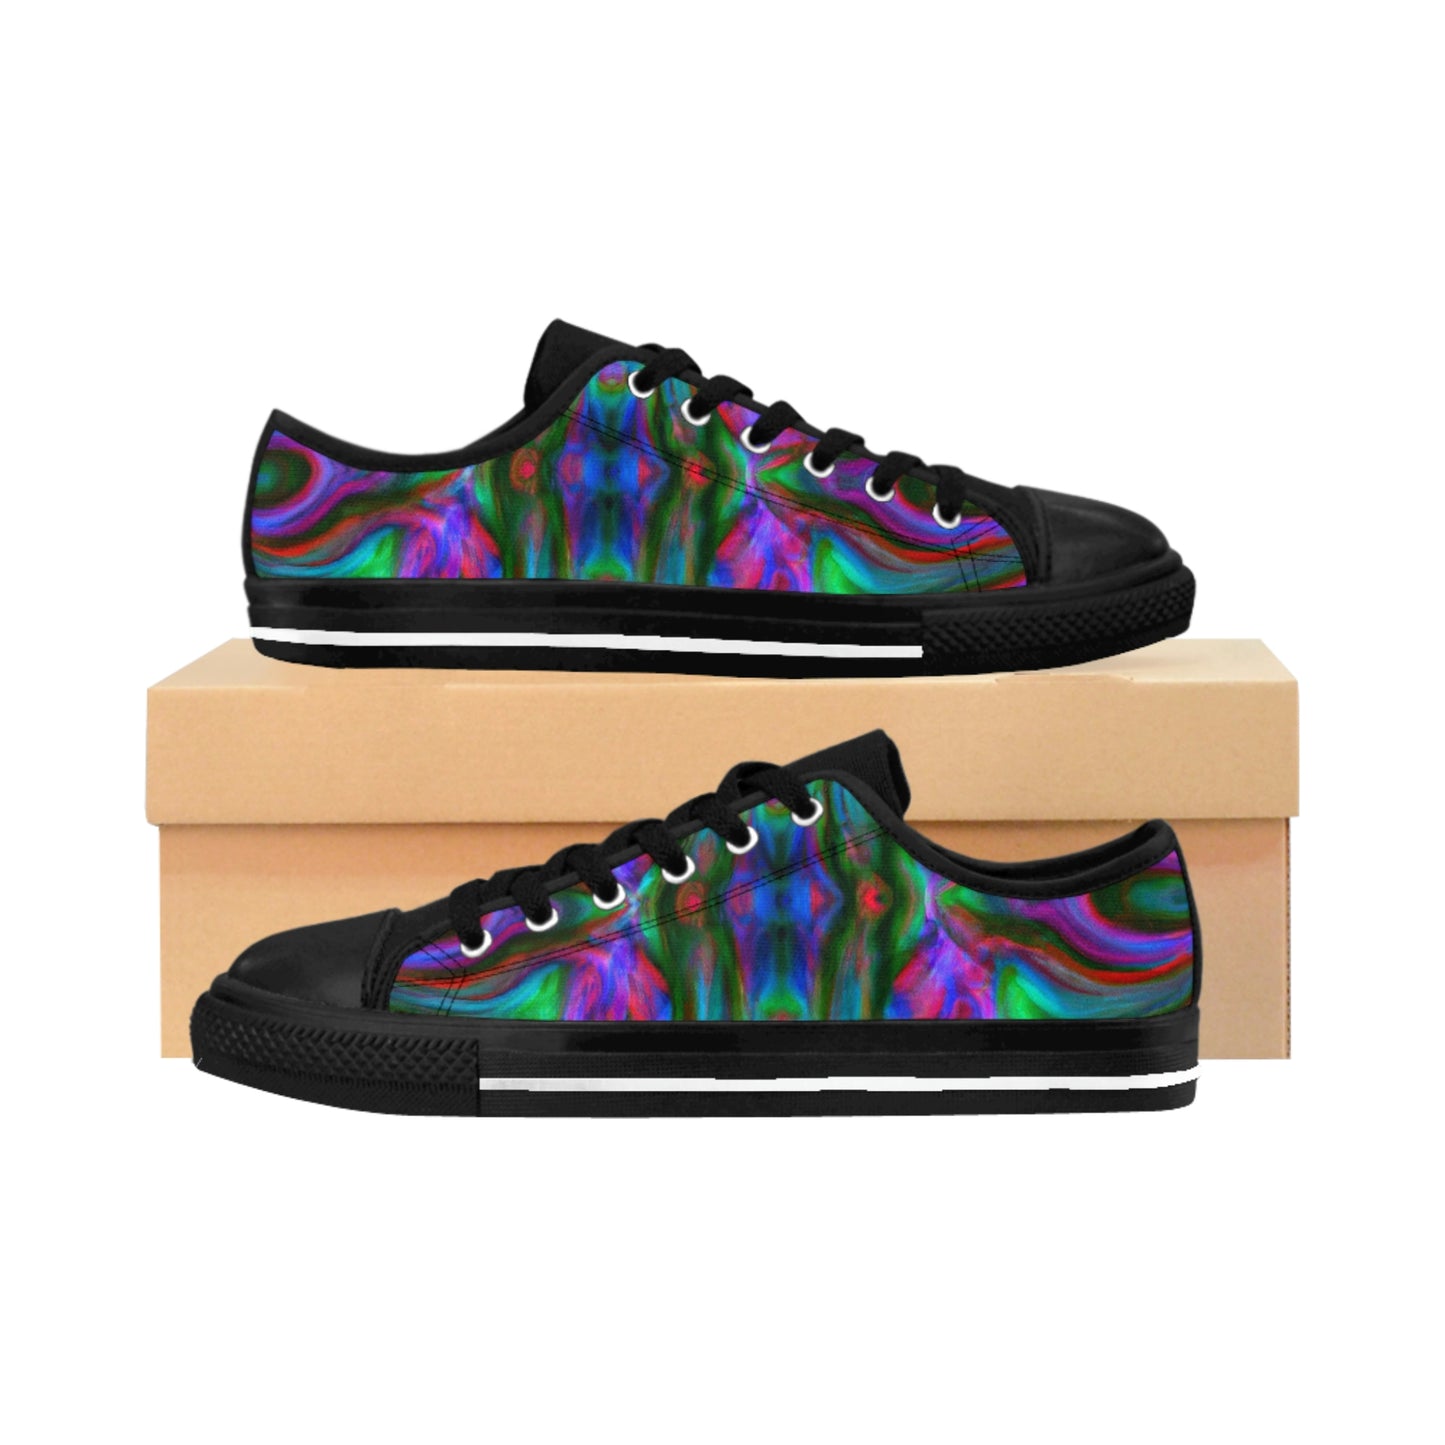 .

Kjul the Cobbler - Psychedelic Low Top